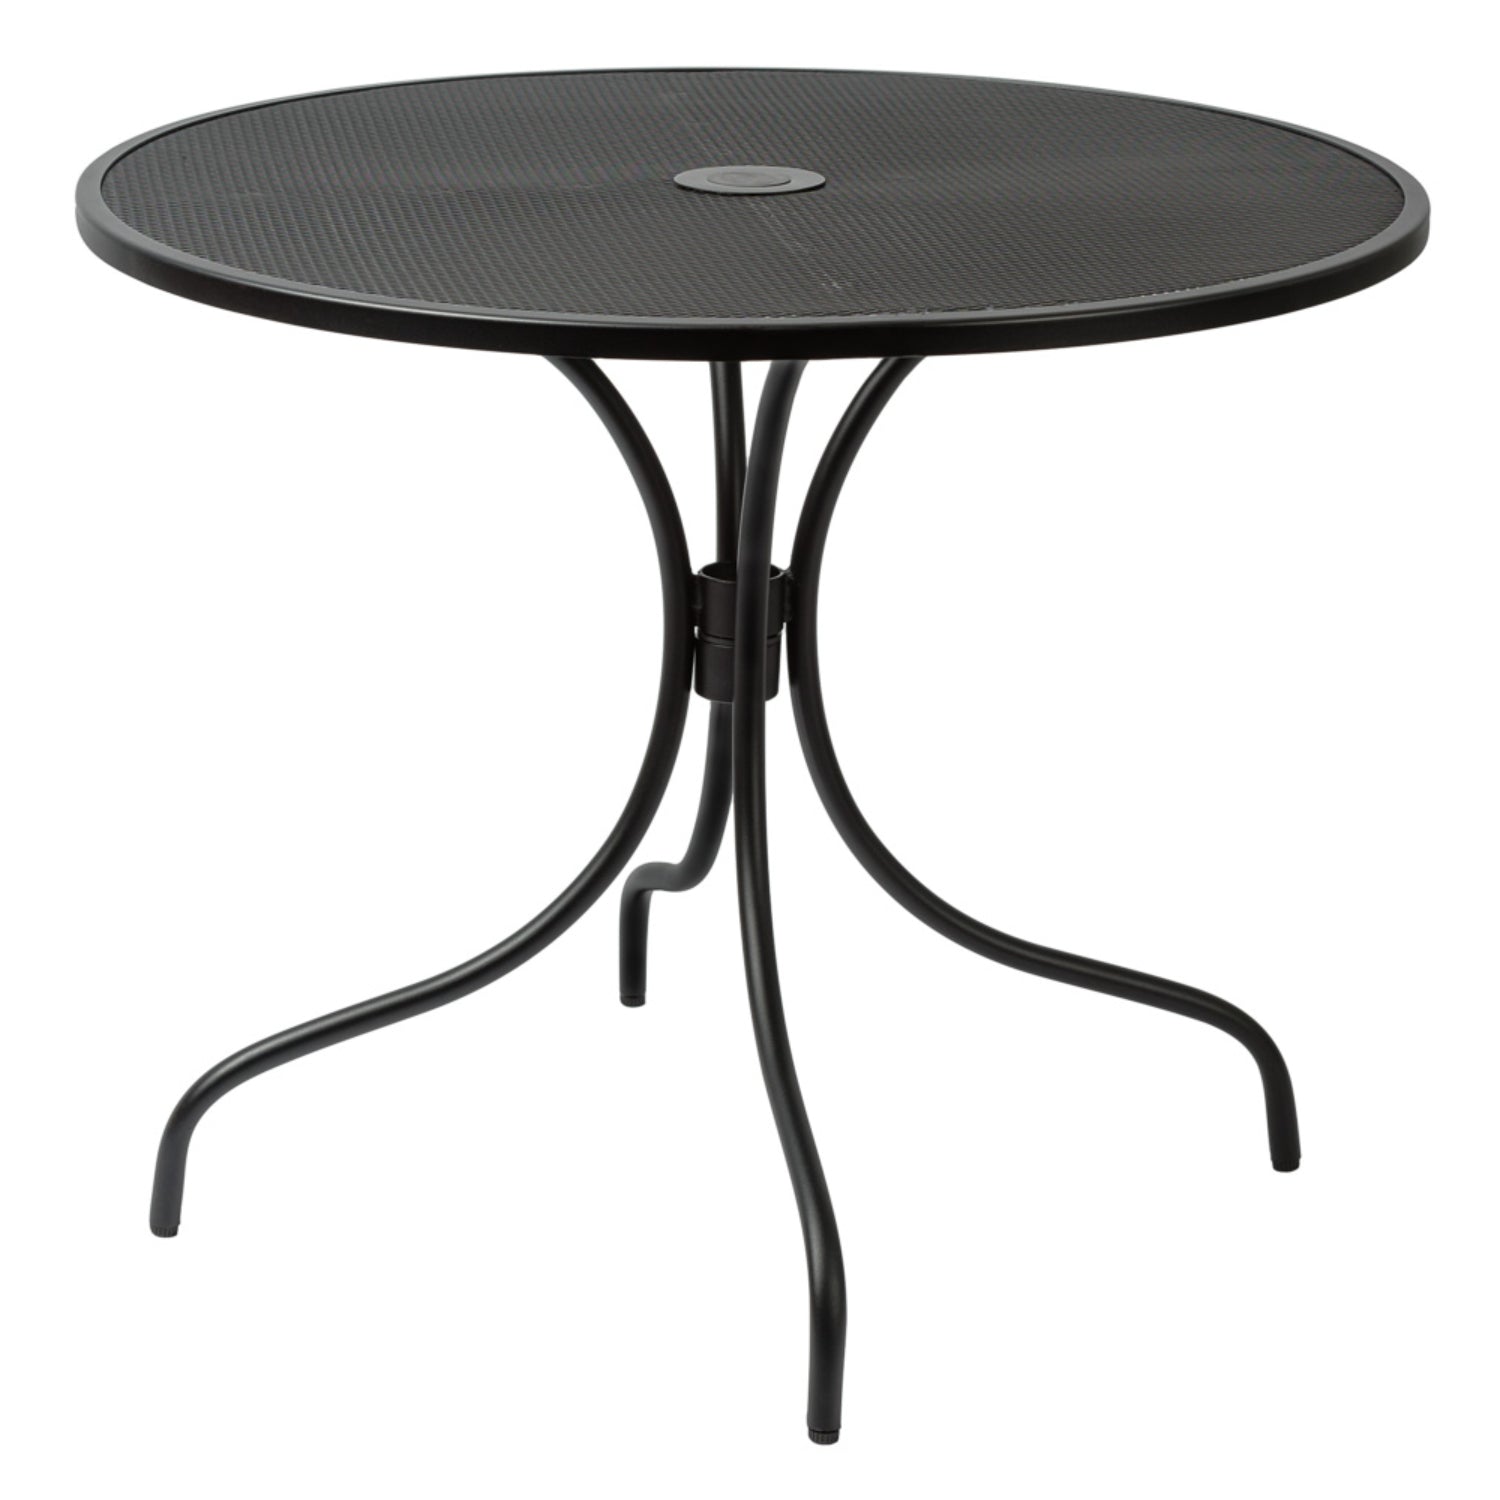 Barnegat Collection Outdoor/Indoor Black Steel 36" Round Dining Height Table with Umbrella Hole